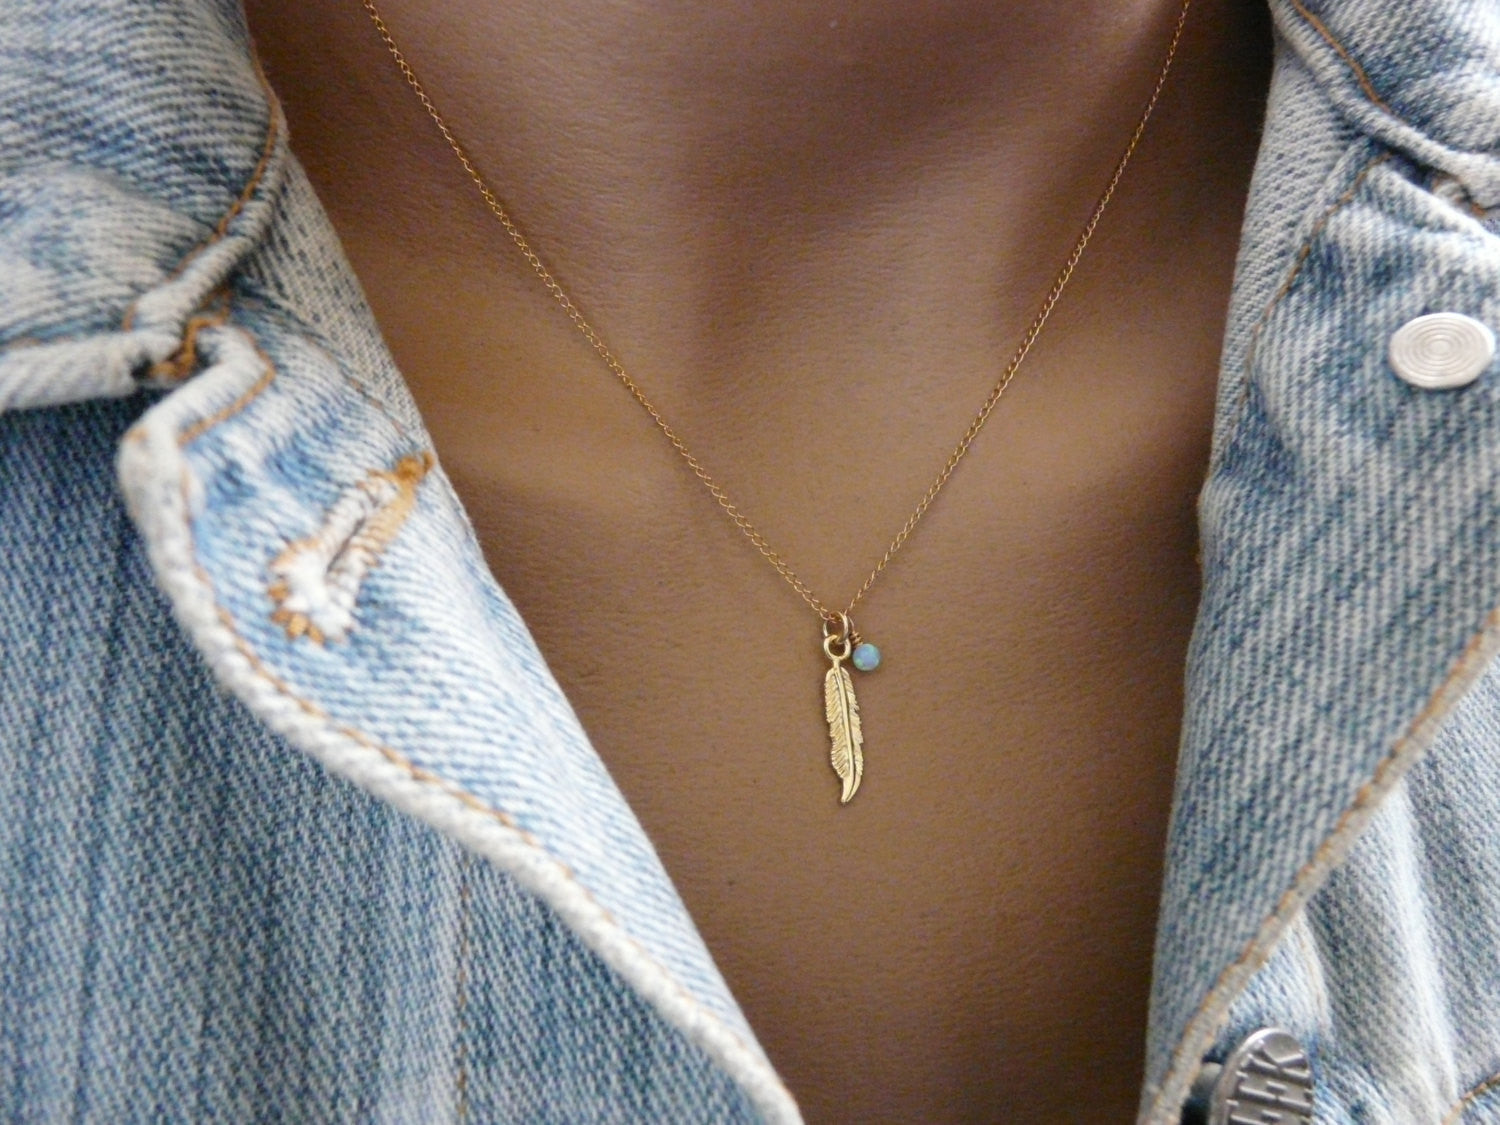 Feather necklace with Opal - OpaLandJewelry